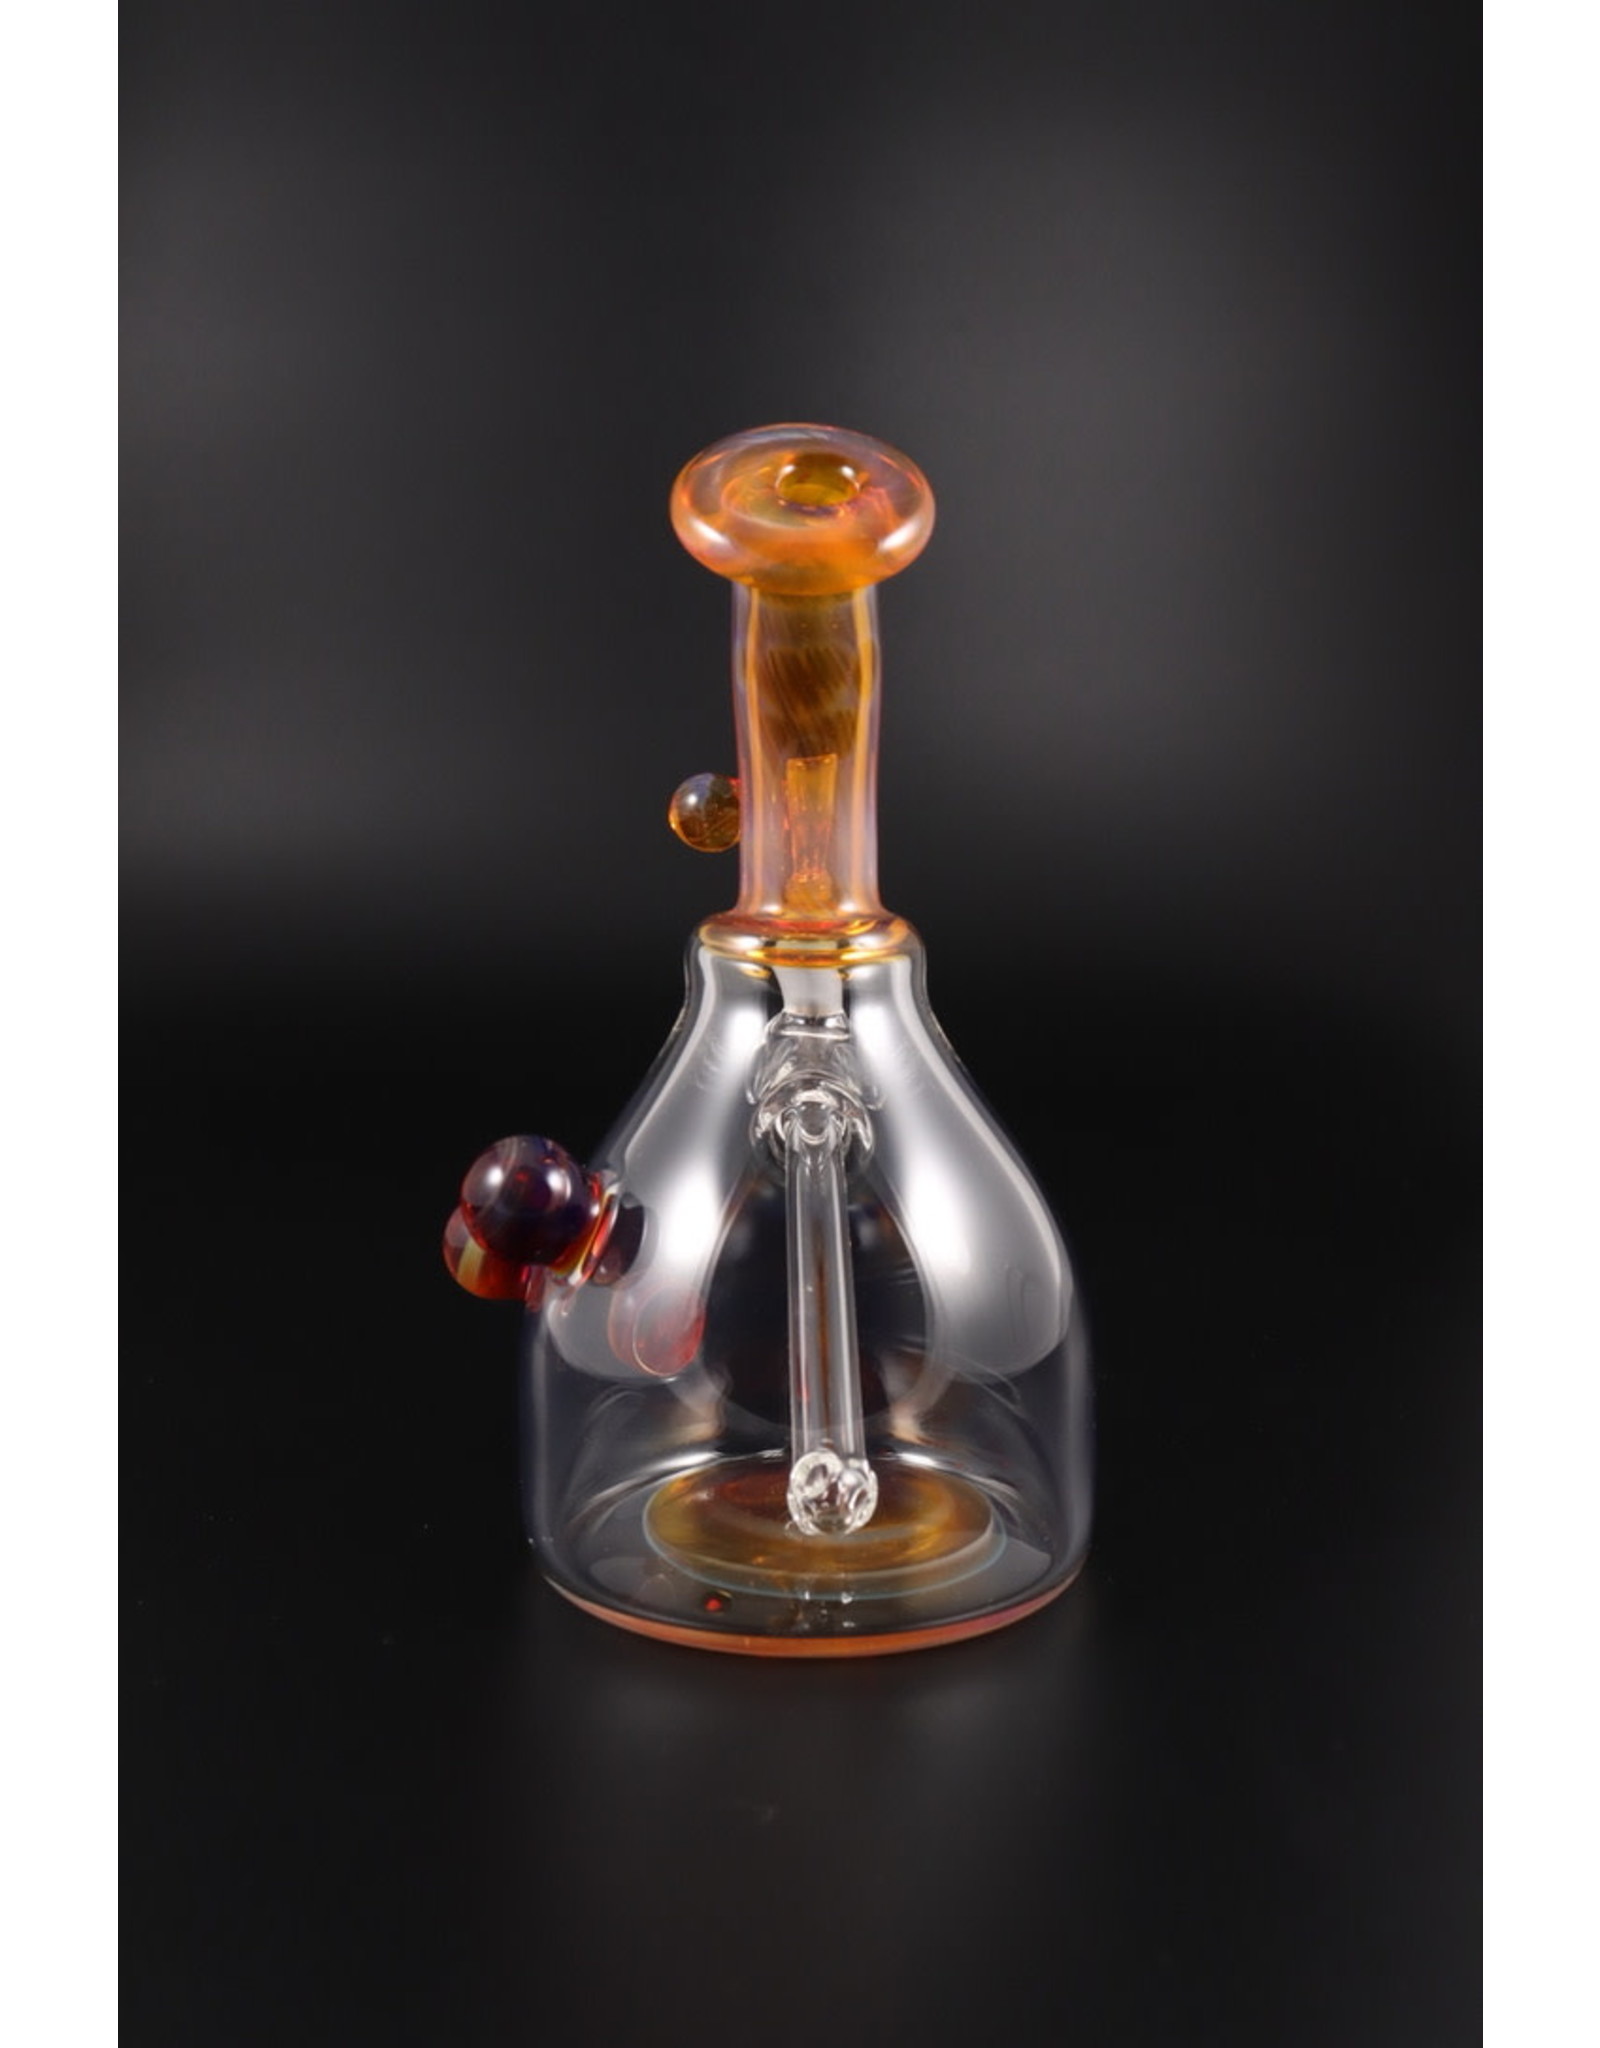 Muph Glass 14mm Female Banger Rig Water Pipe